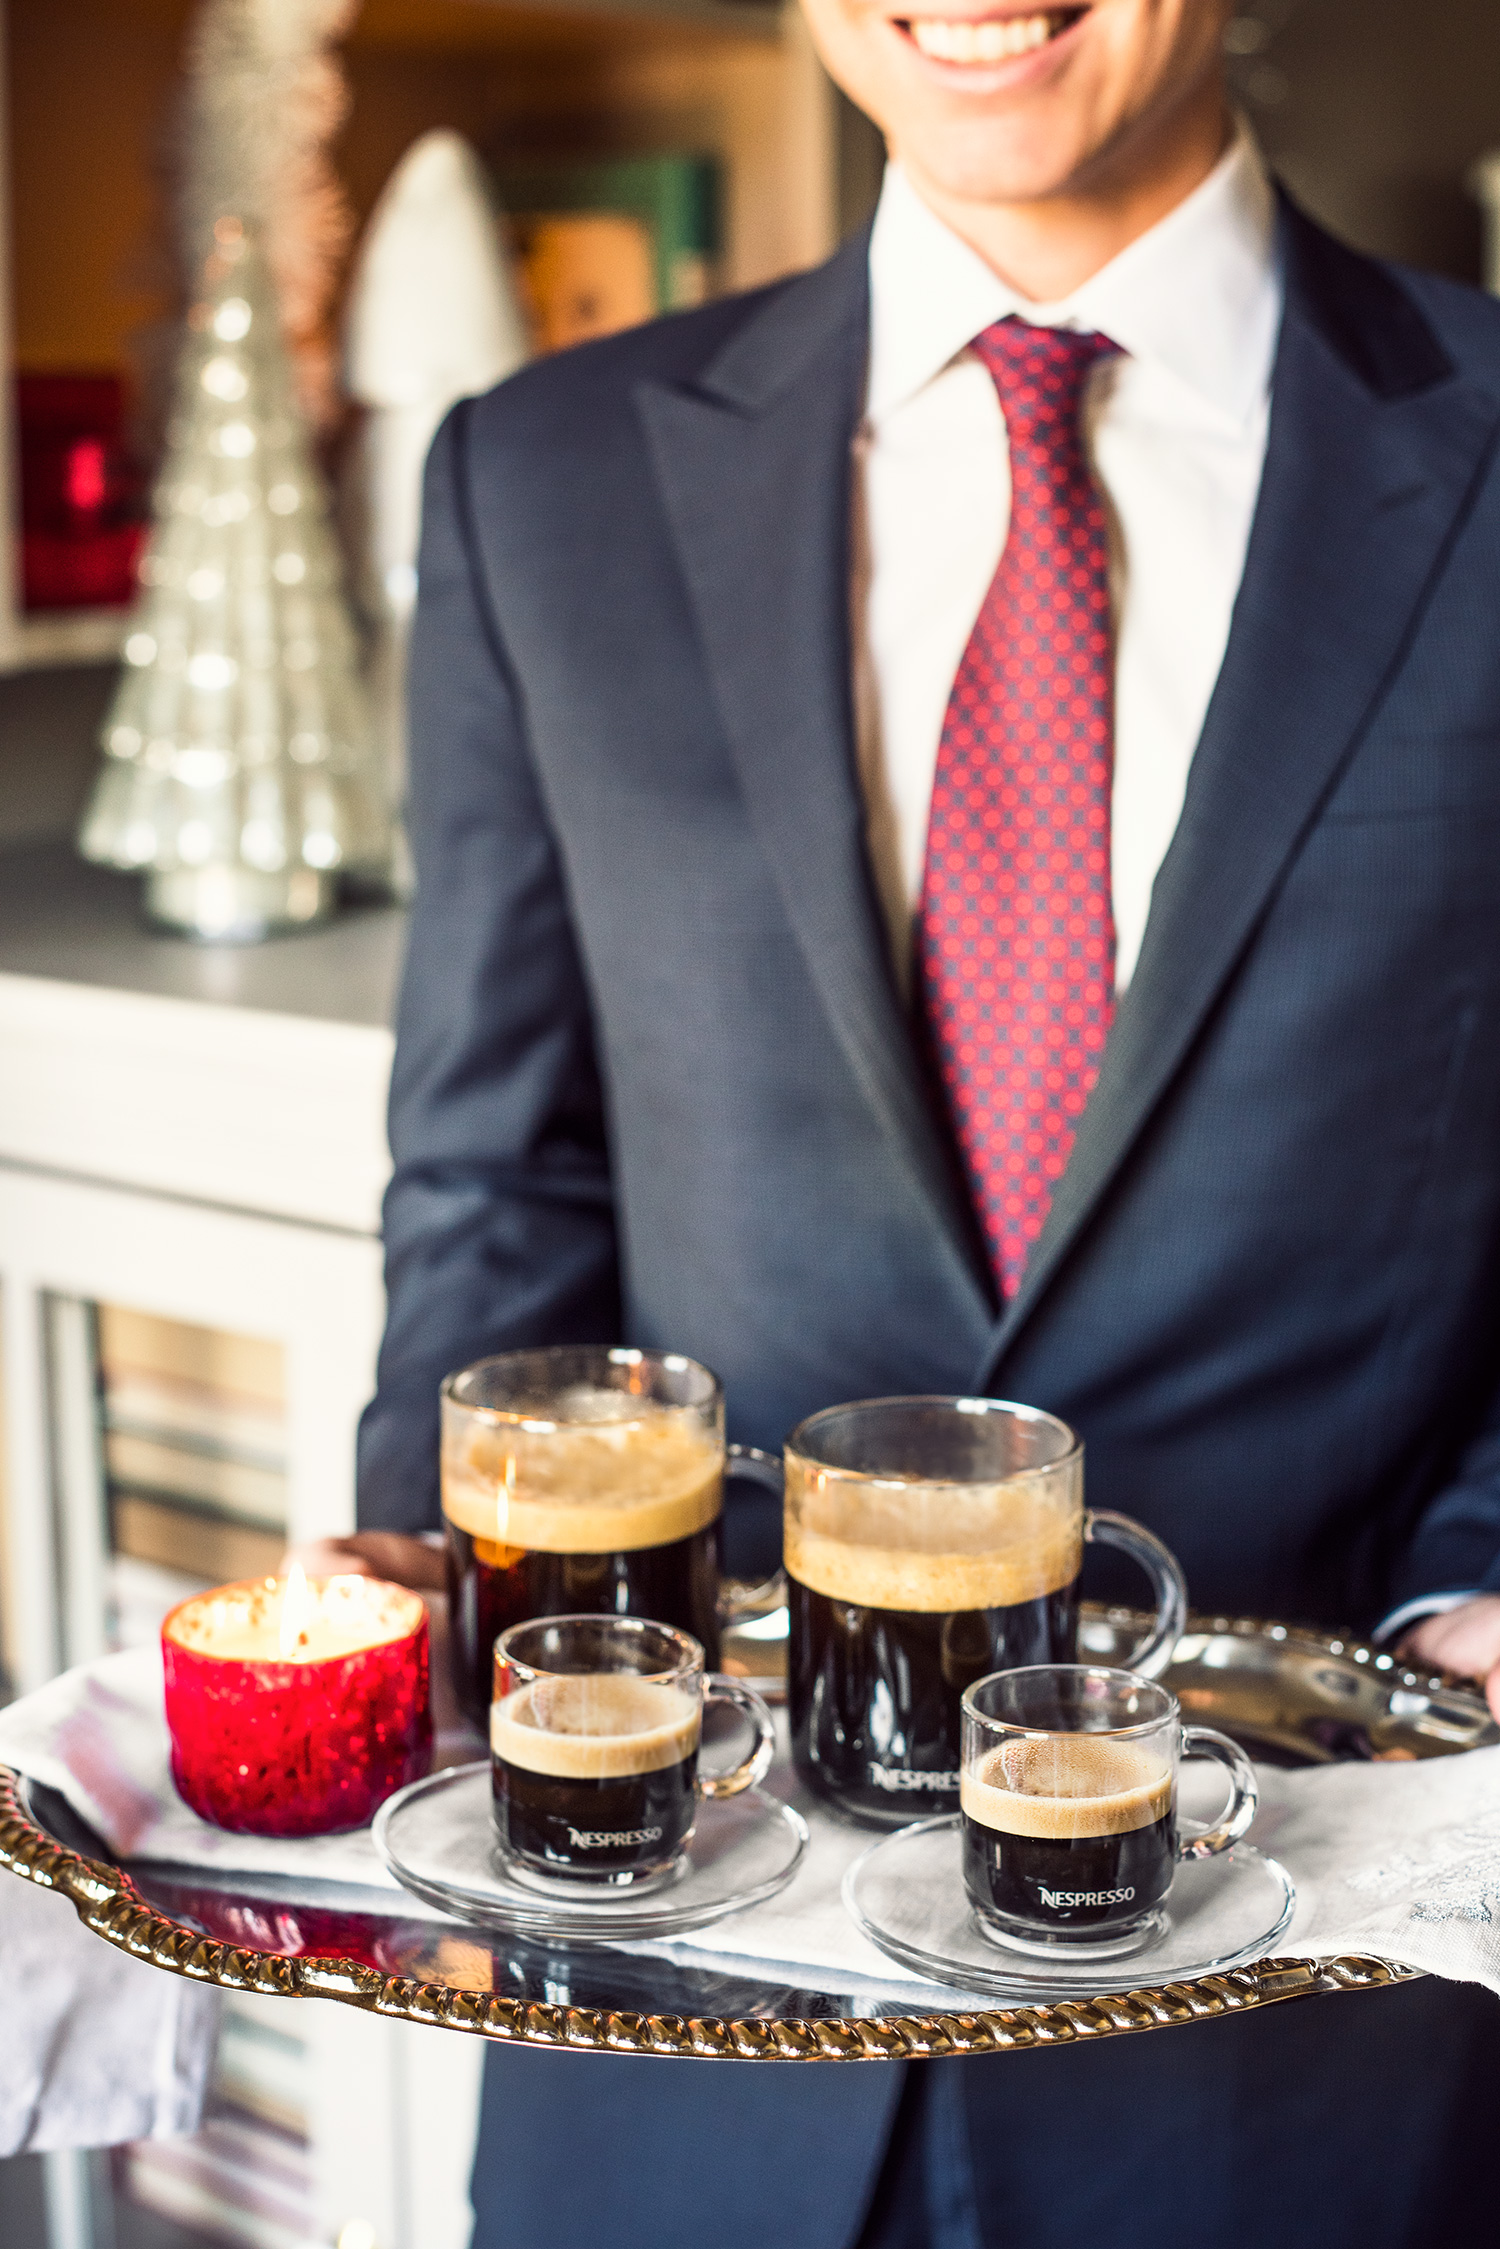 "Open this one first!" Give the gift of Nespresso this holiday season.